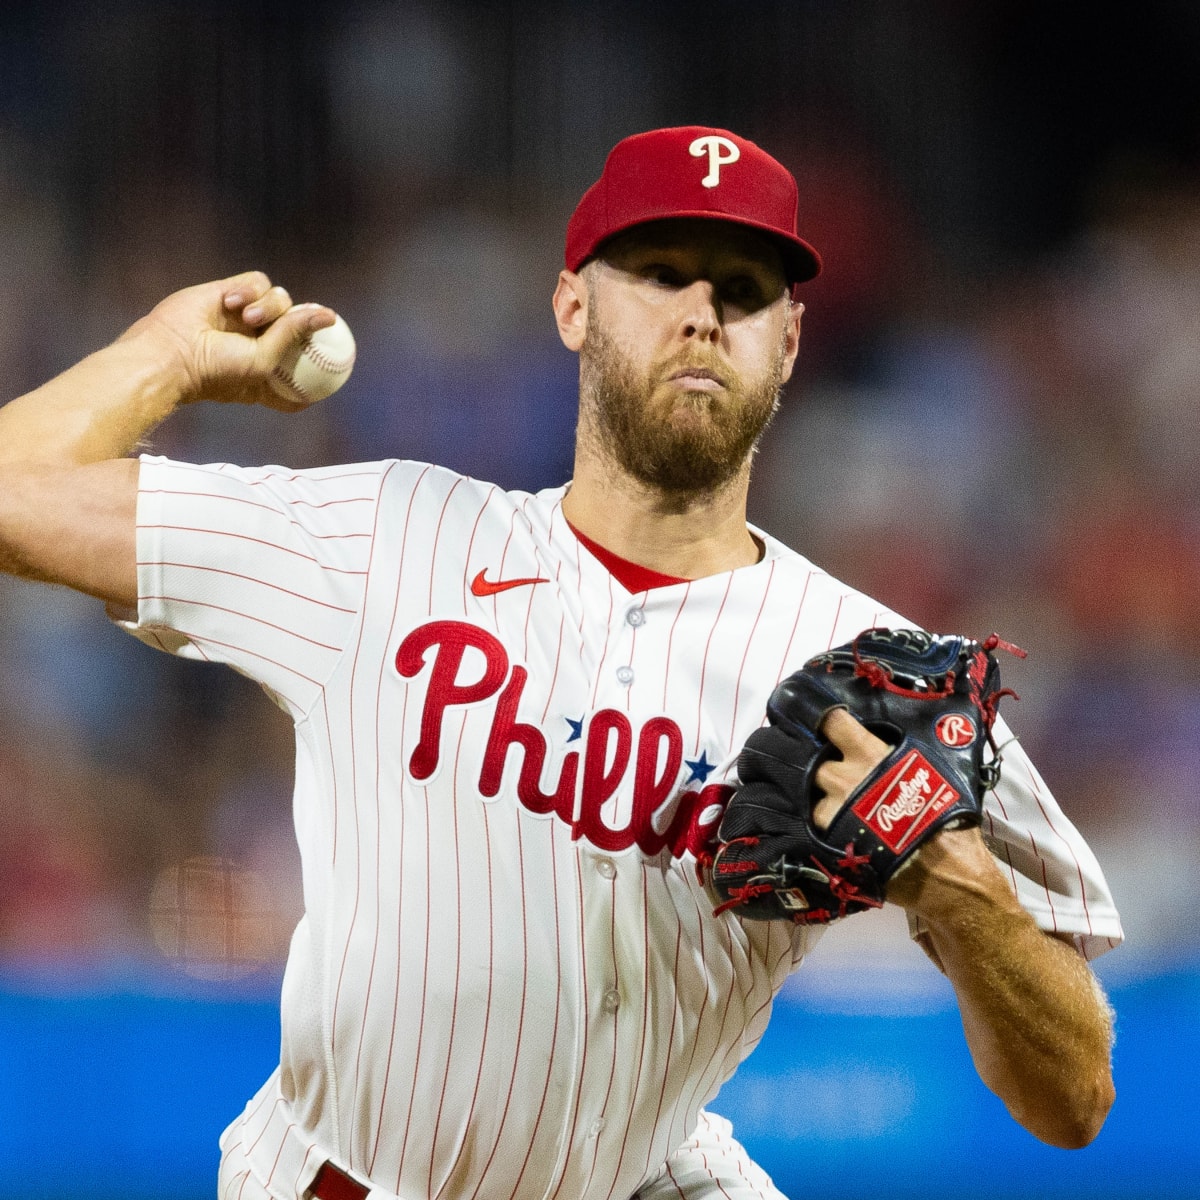 Phillies have Zack Wheeler but the other starters must produce in